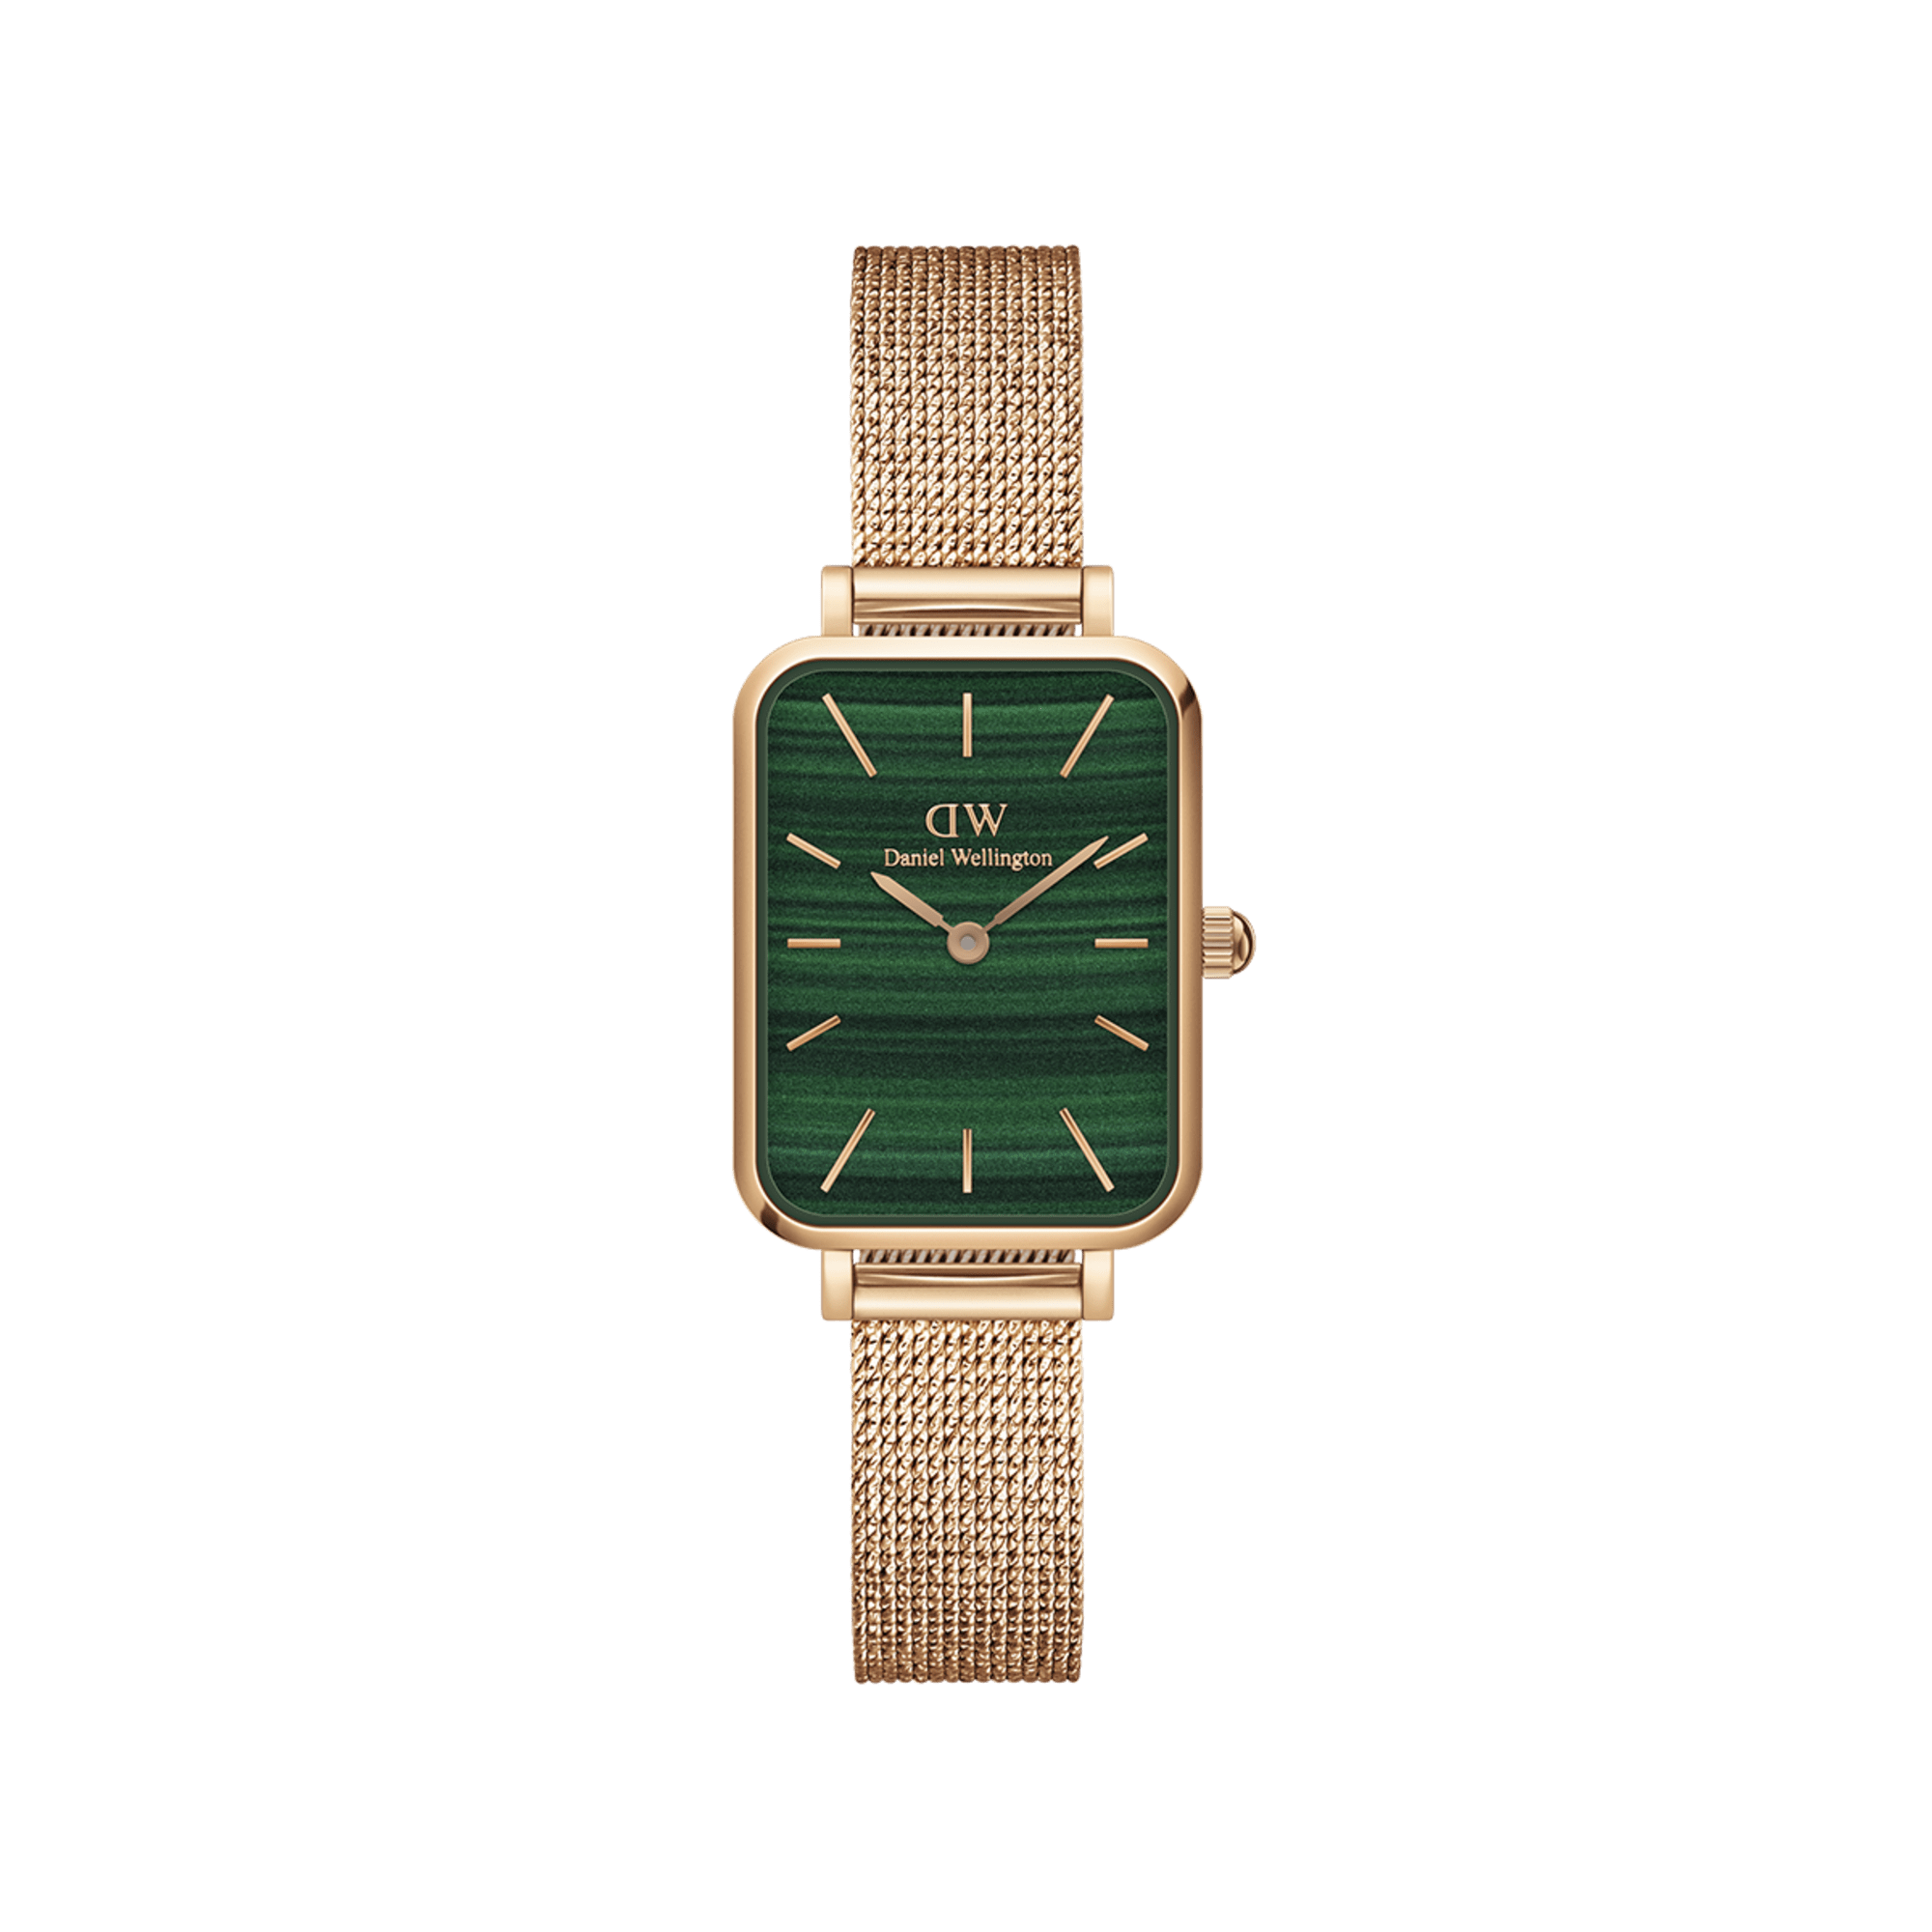 Quadro - Green square dial watch for women | DW